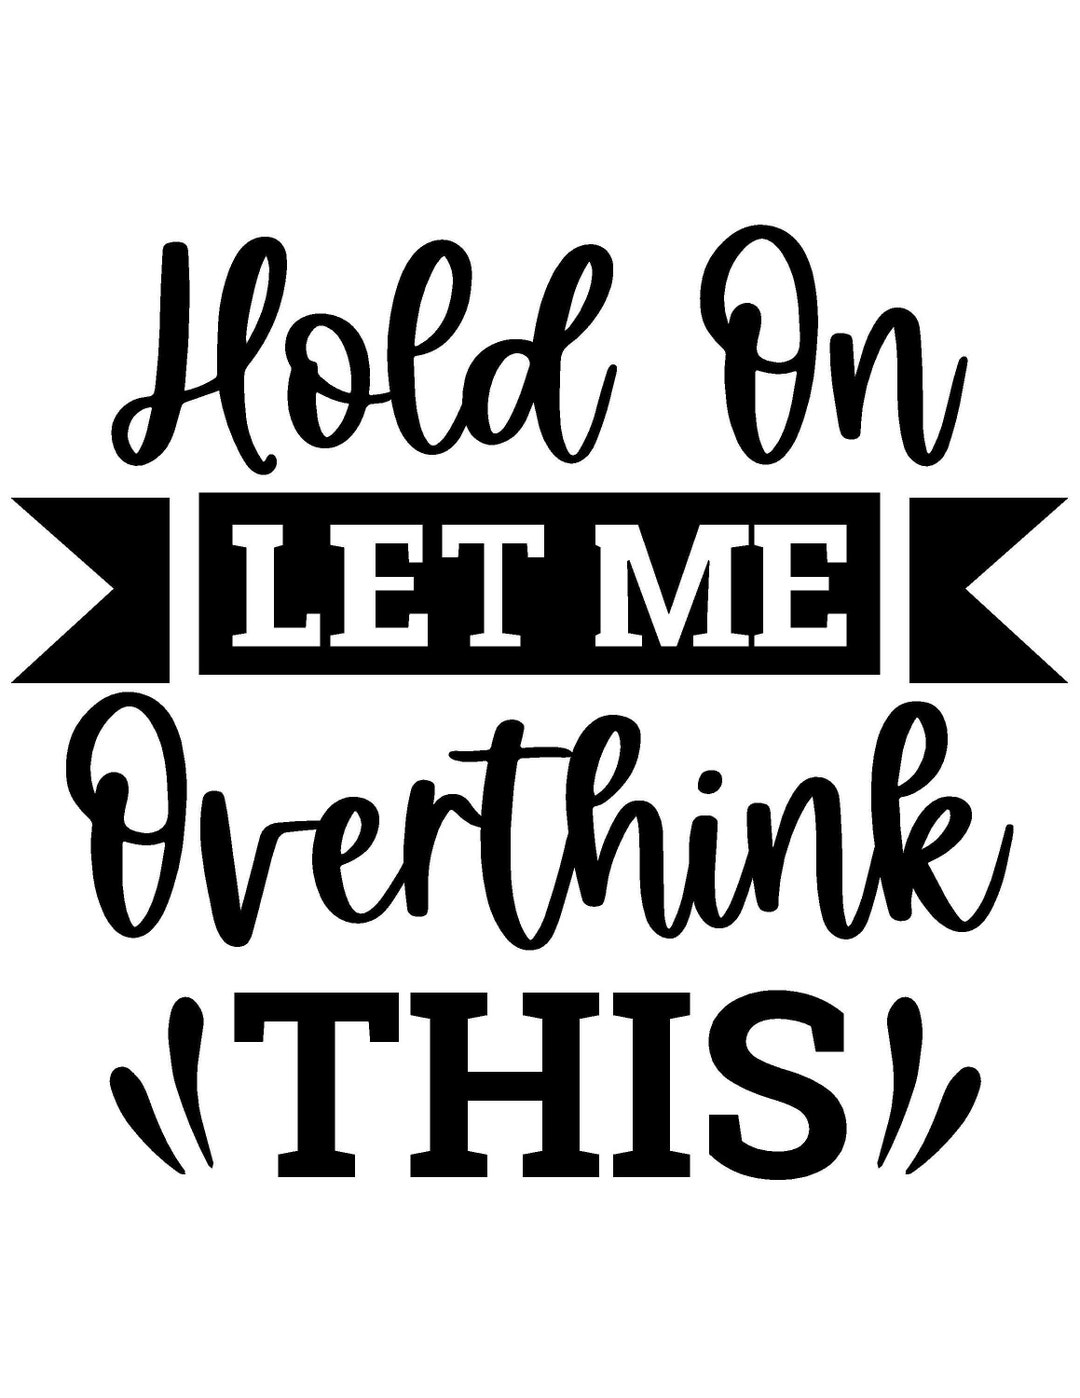 Hold on Let Me Overthink This. SVG File - Etsy